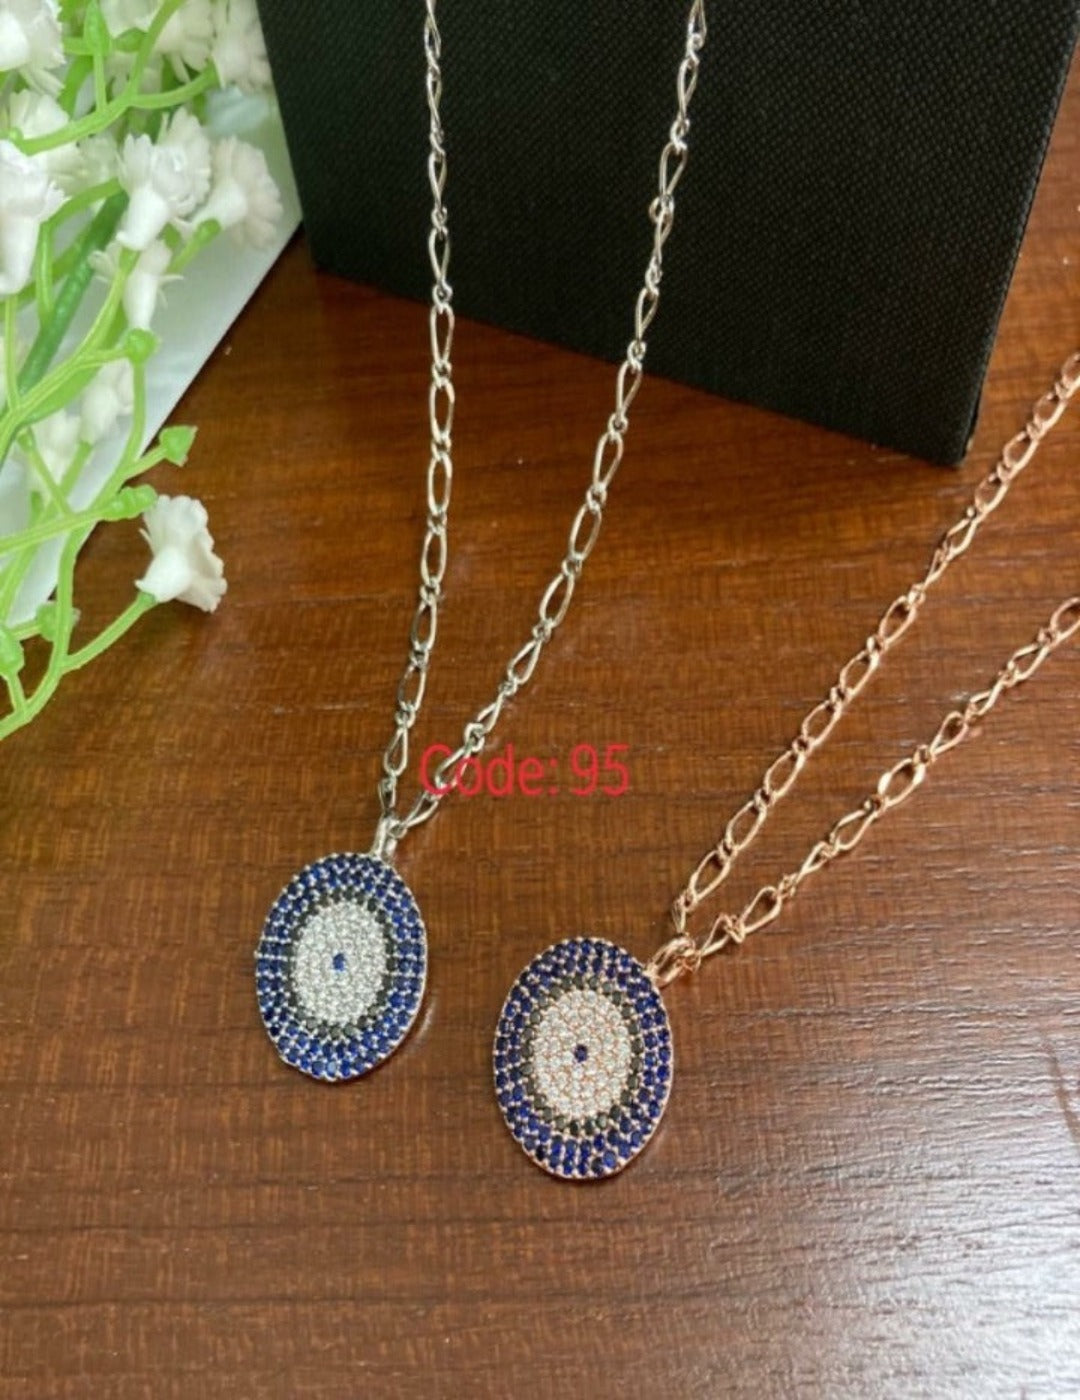 Jinders Stylish Evil Eye Necklace With Encrusted Faux Sapphires And Faux Diamonds Pendant